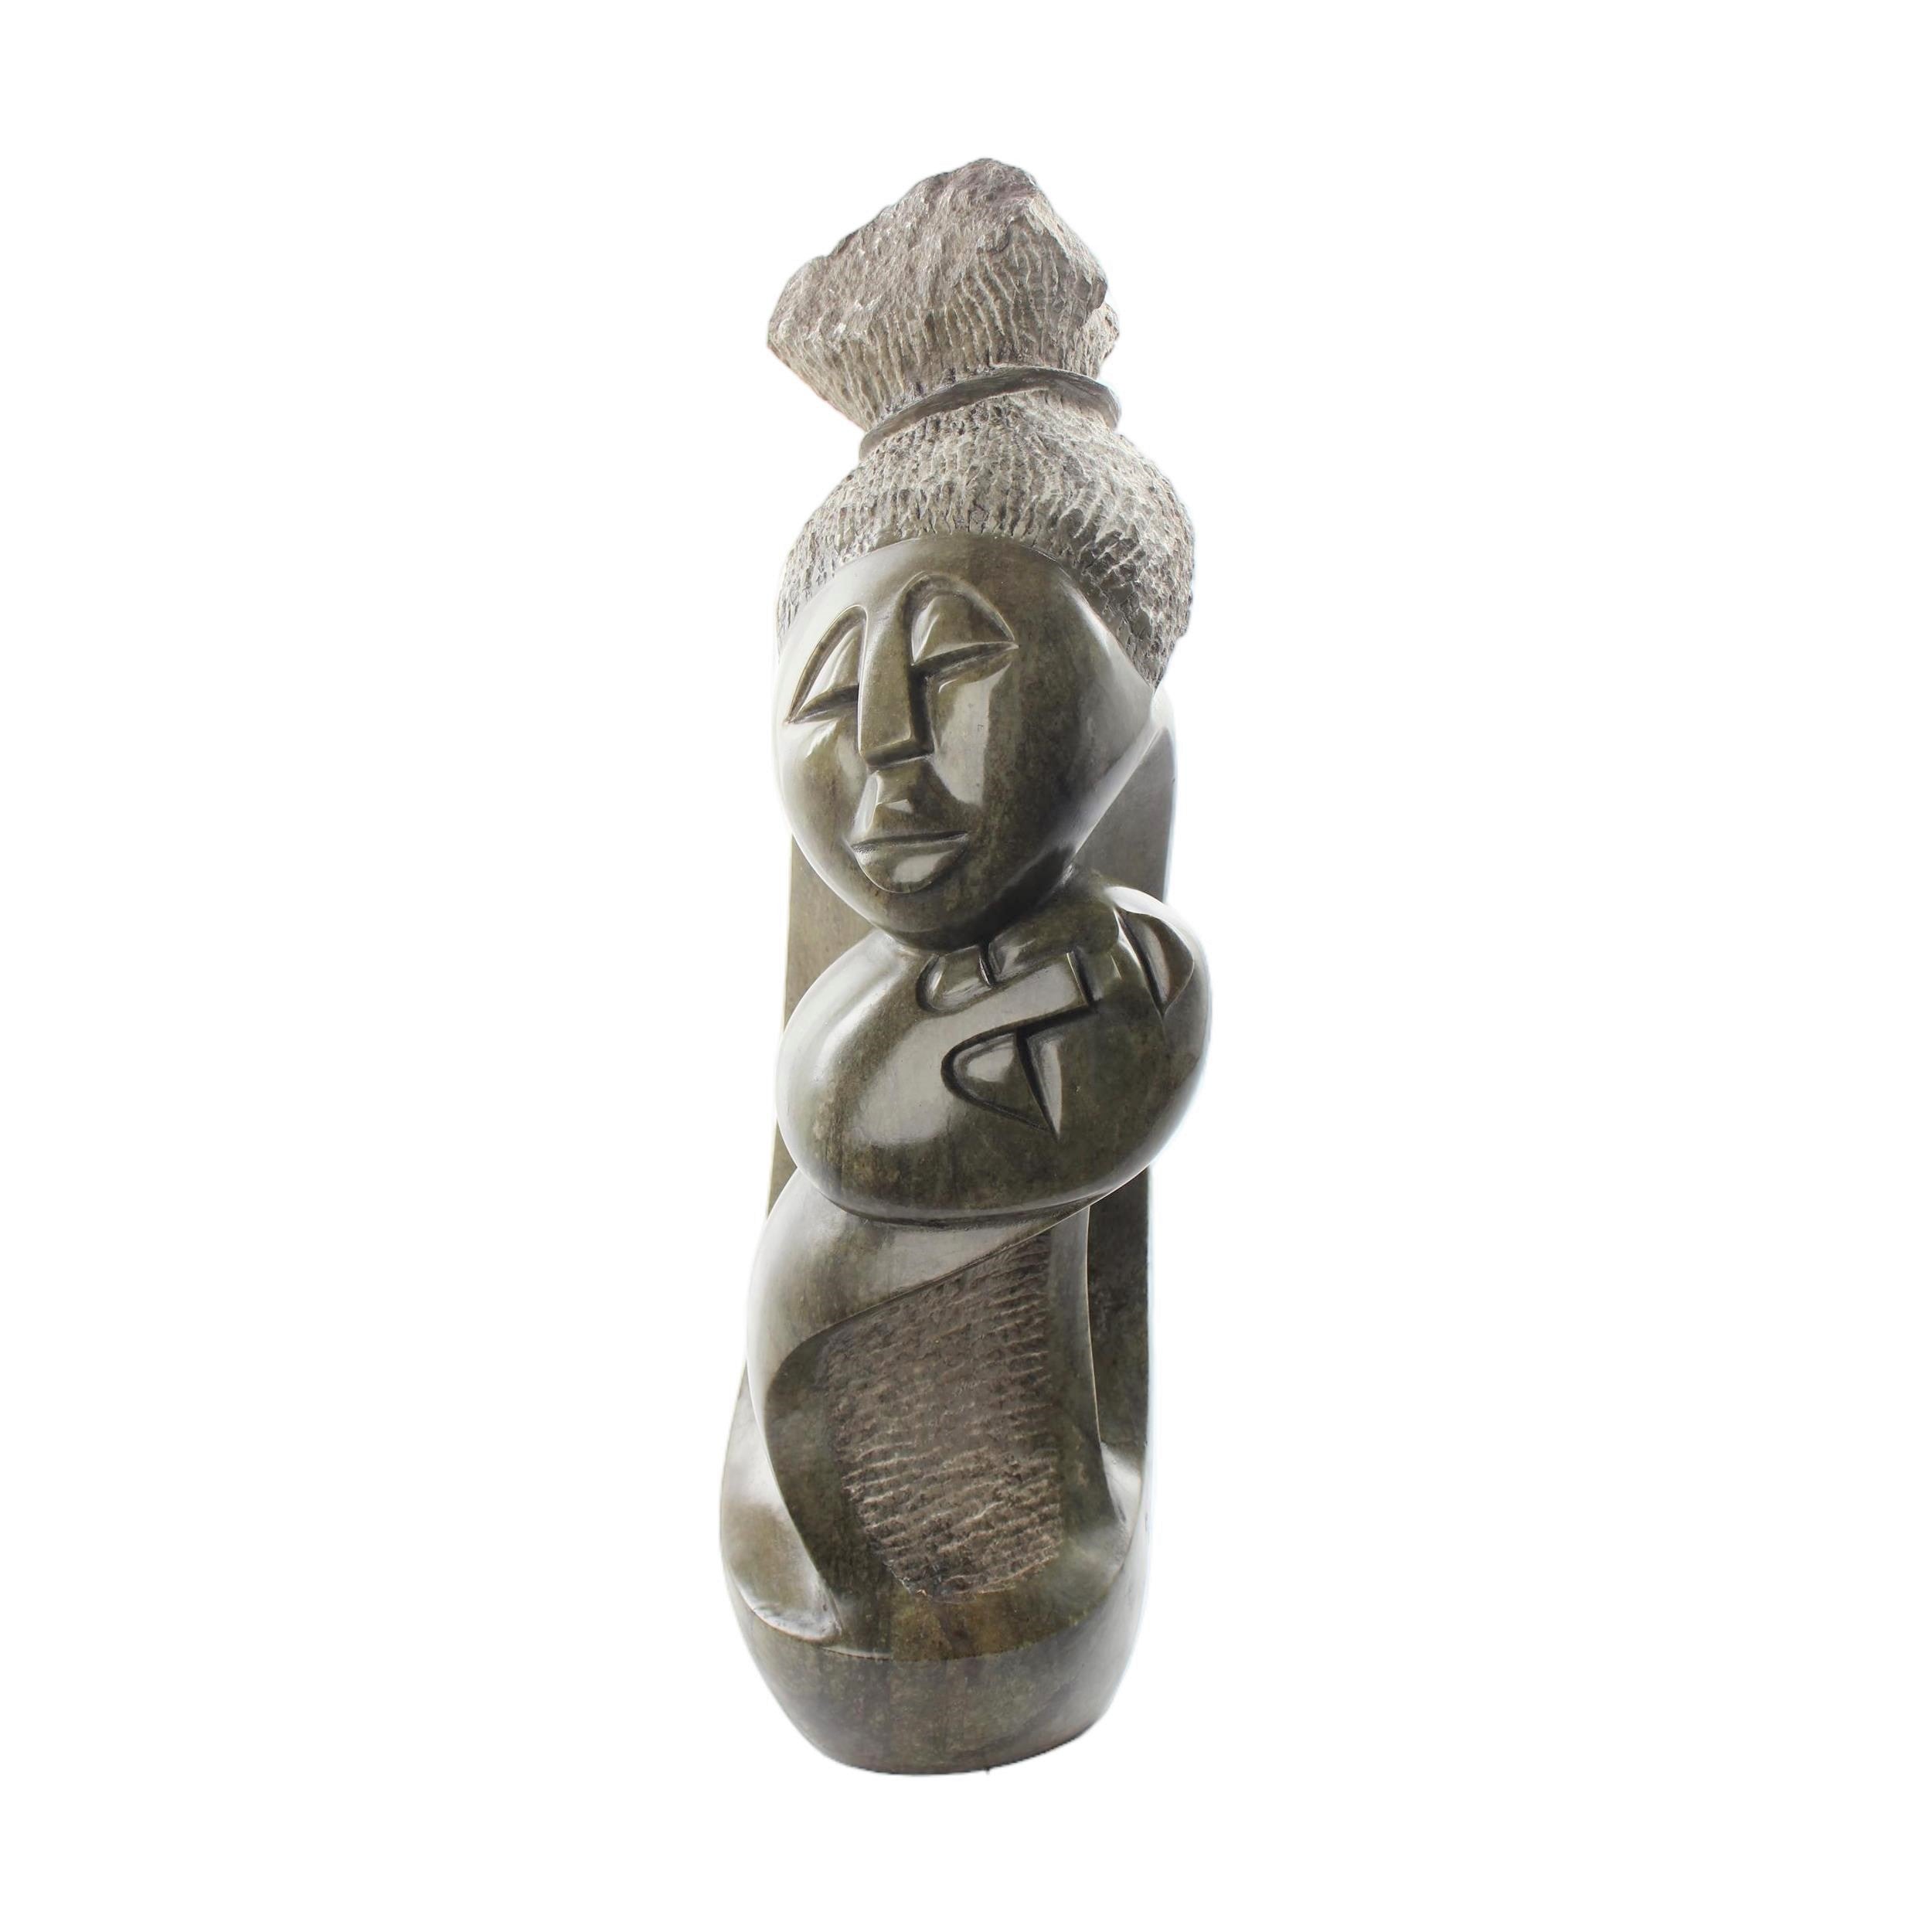 Shona Tribe Fruit Serpentine Mother and Child ~26.4" Tall